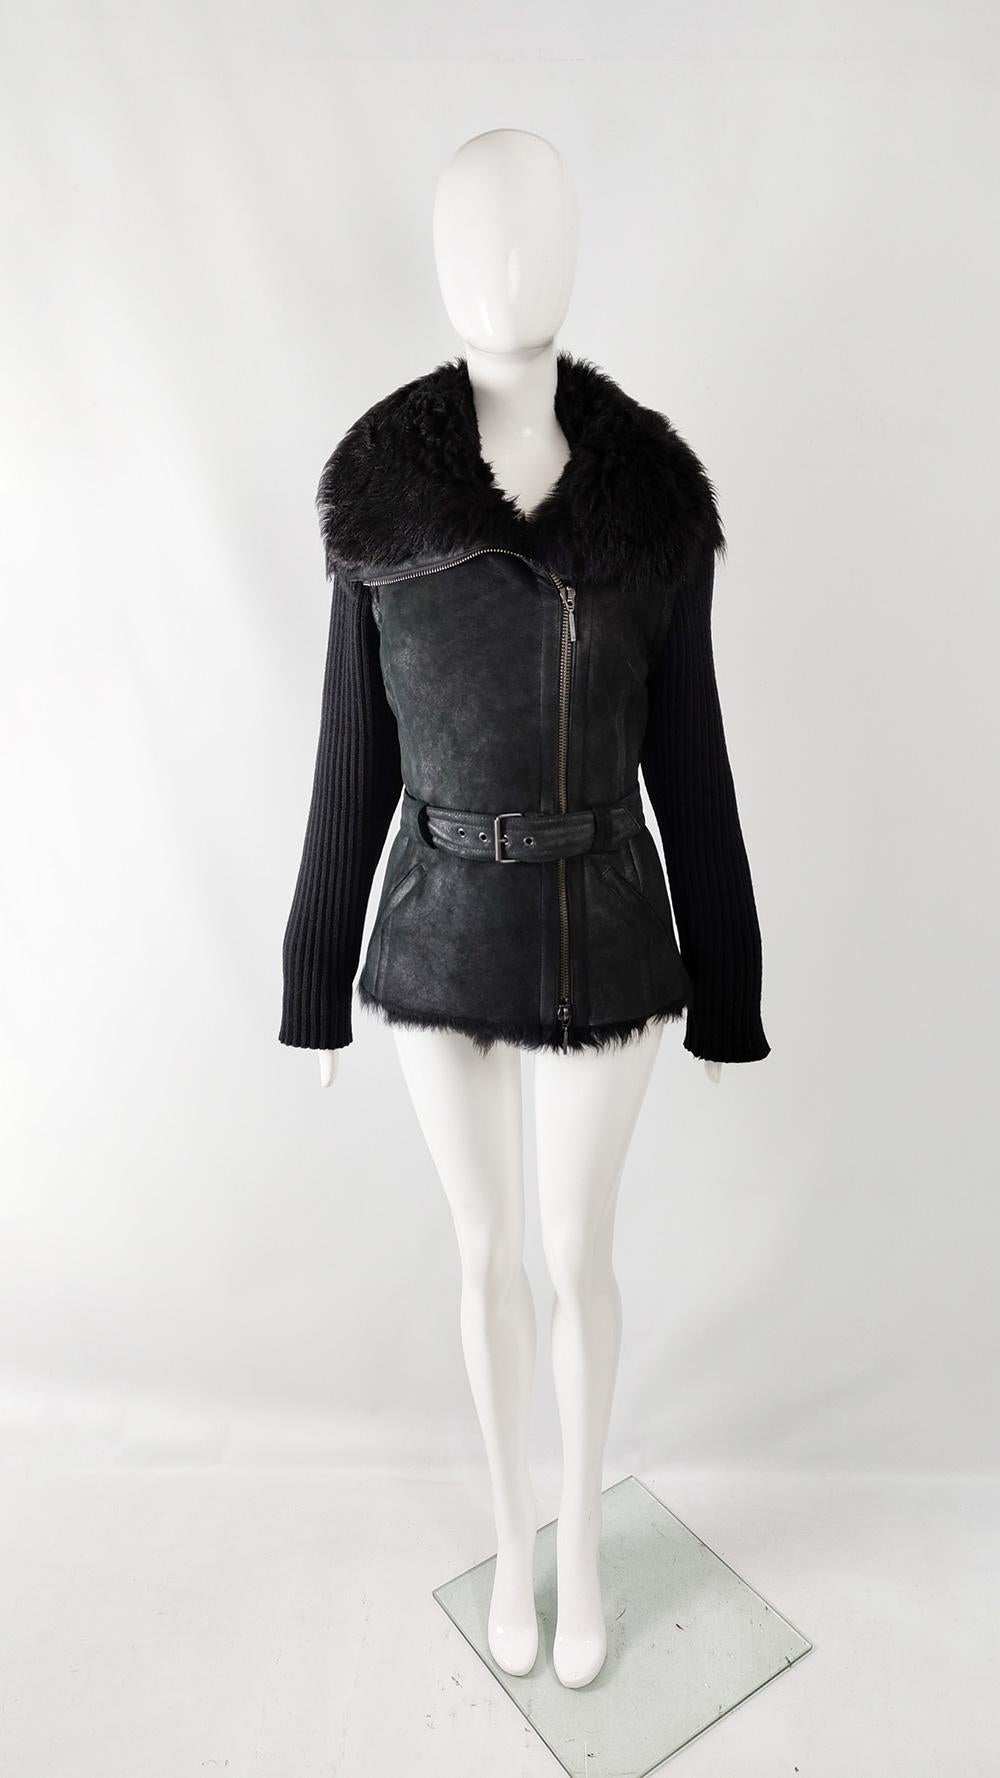 An incredible and rare vintage womens jacket from the 90s by luxury French designer label, Plein Sud for their mainline label. In a luxurious, fairly heavy black sheepskin leather with a warm, black shearling lining and lined wool knit sleeves. It